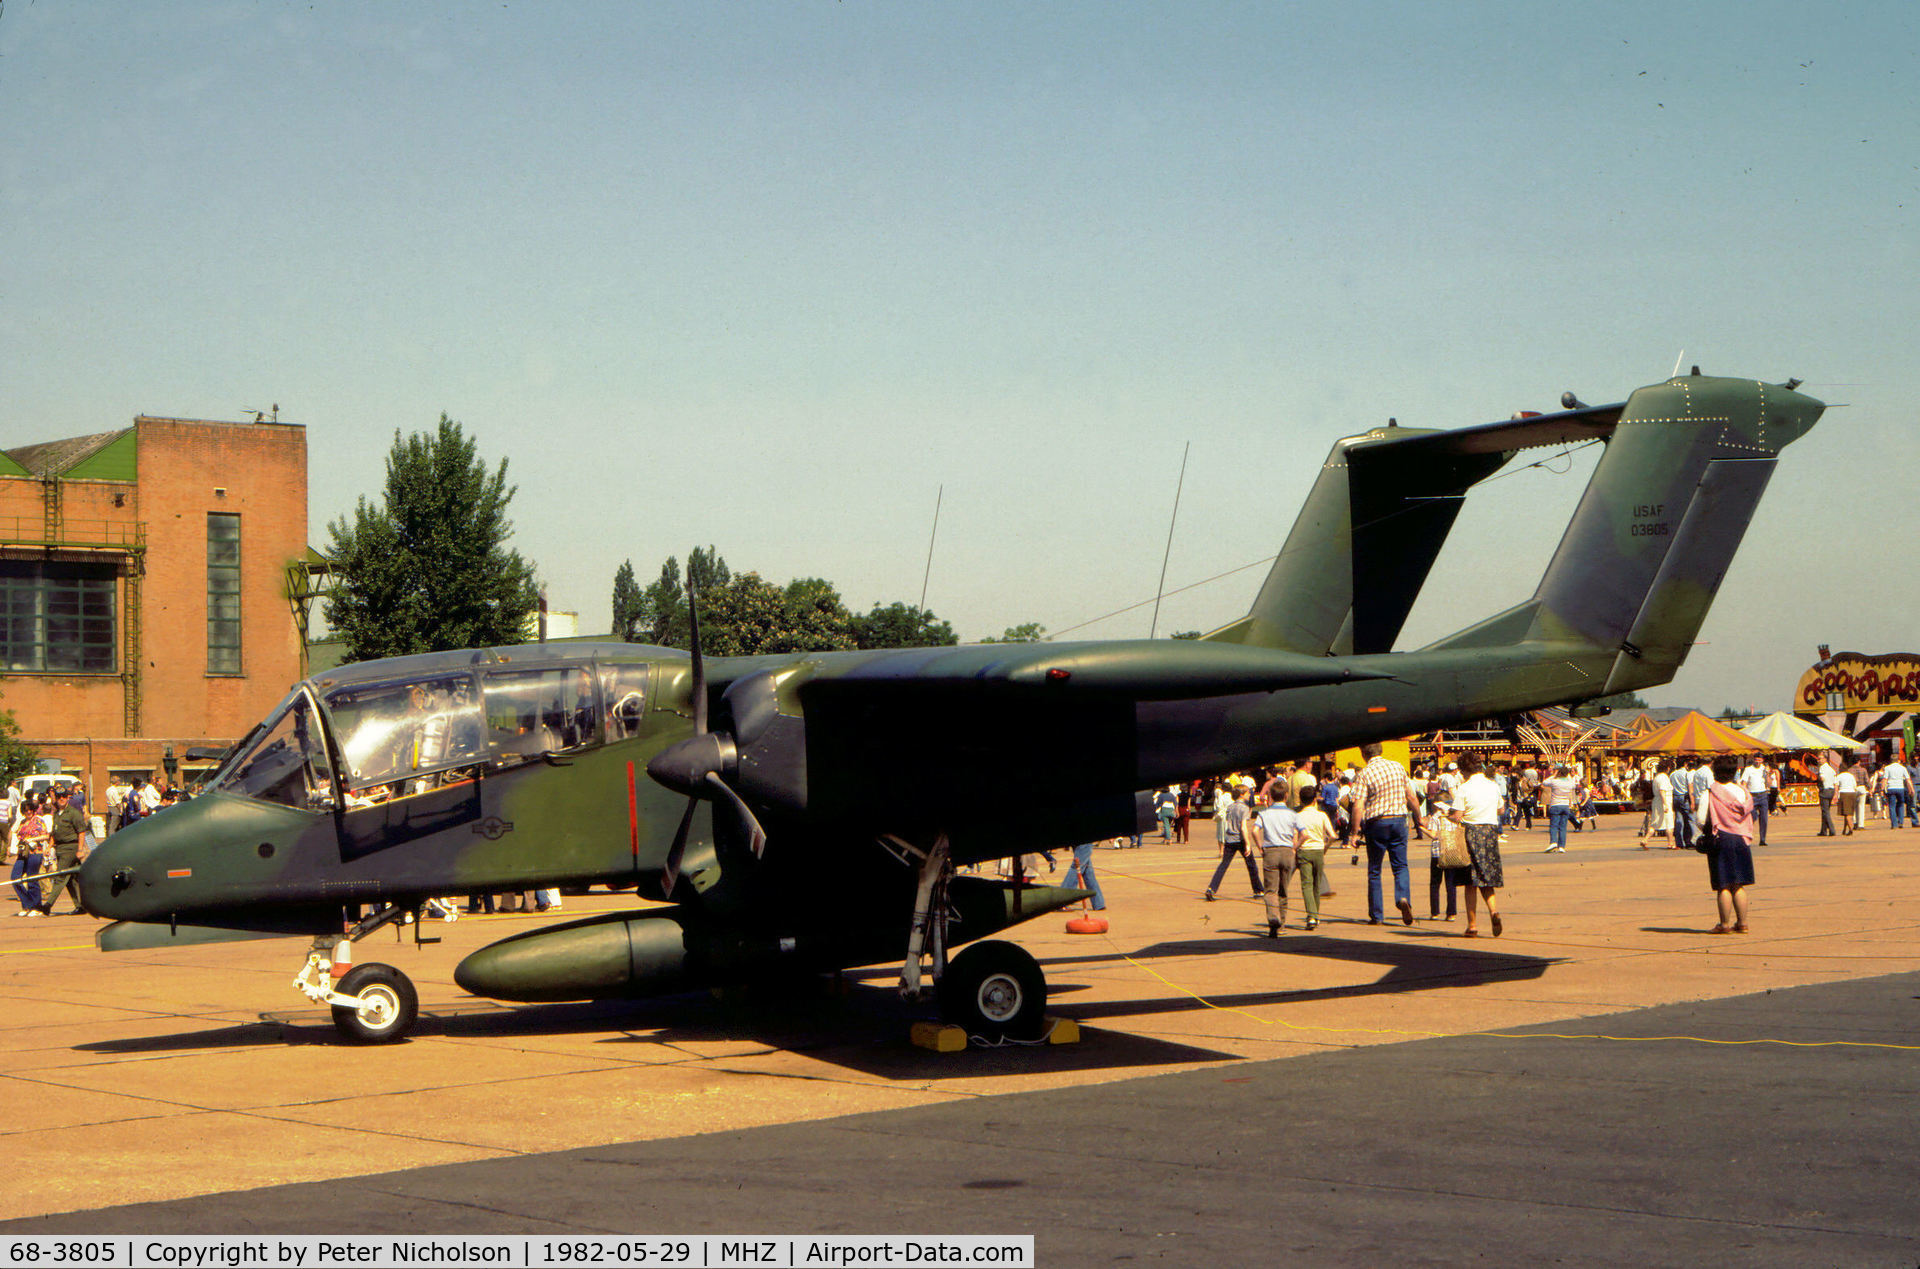 68-3805, 1968 North American Rockwell OV-10A Bronco C/N 321-131, OV-10A Bronco of the 601st Tactical Control Wing based at Sembach on display at the 1982 RAF Mildenhall Air Fete.